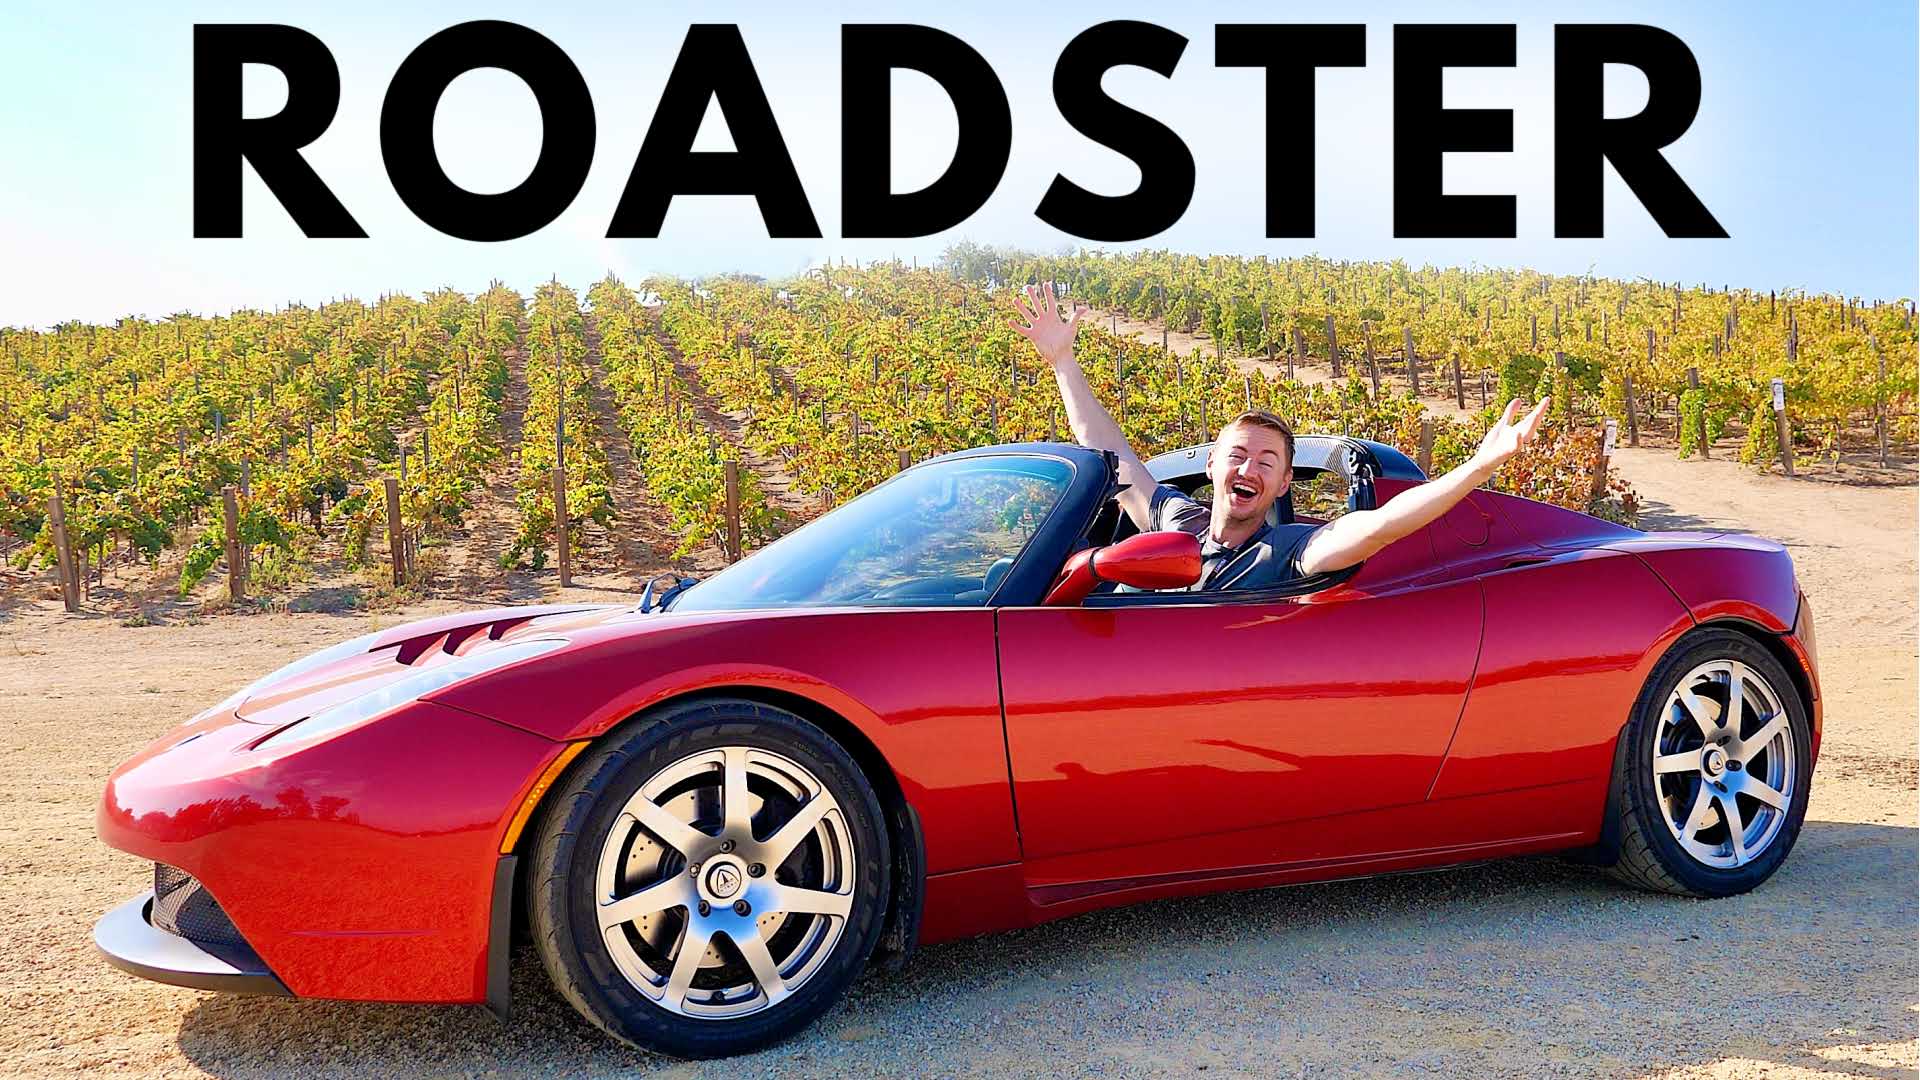 Tesla-Swapped Pontiac Fiero Is a Tesla Roadster From Another Timeline